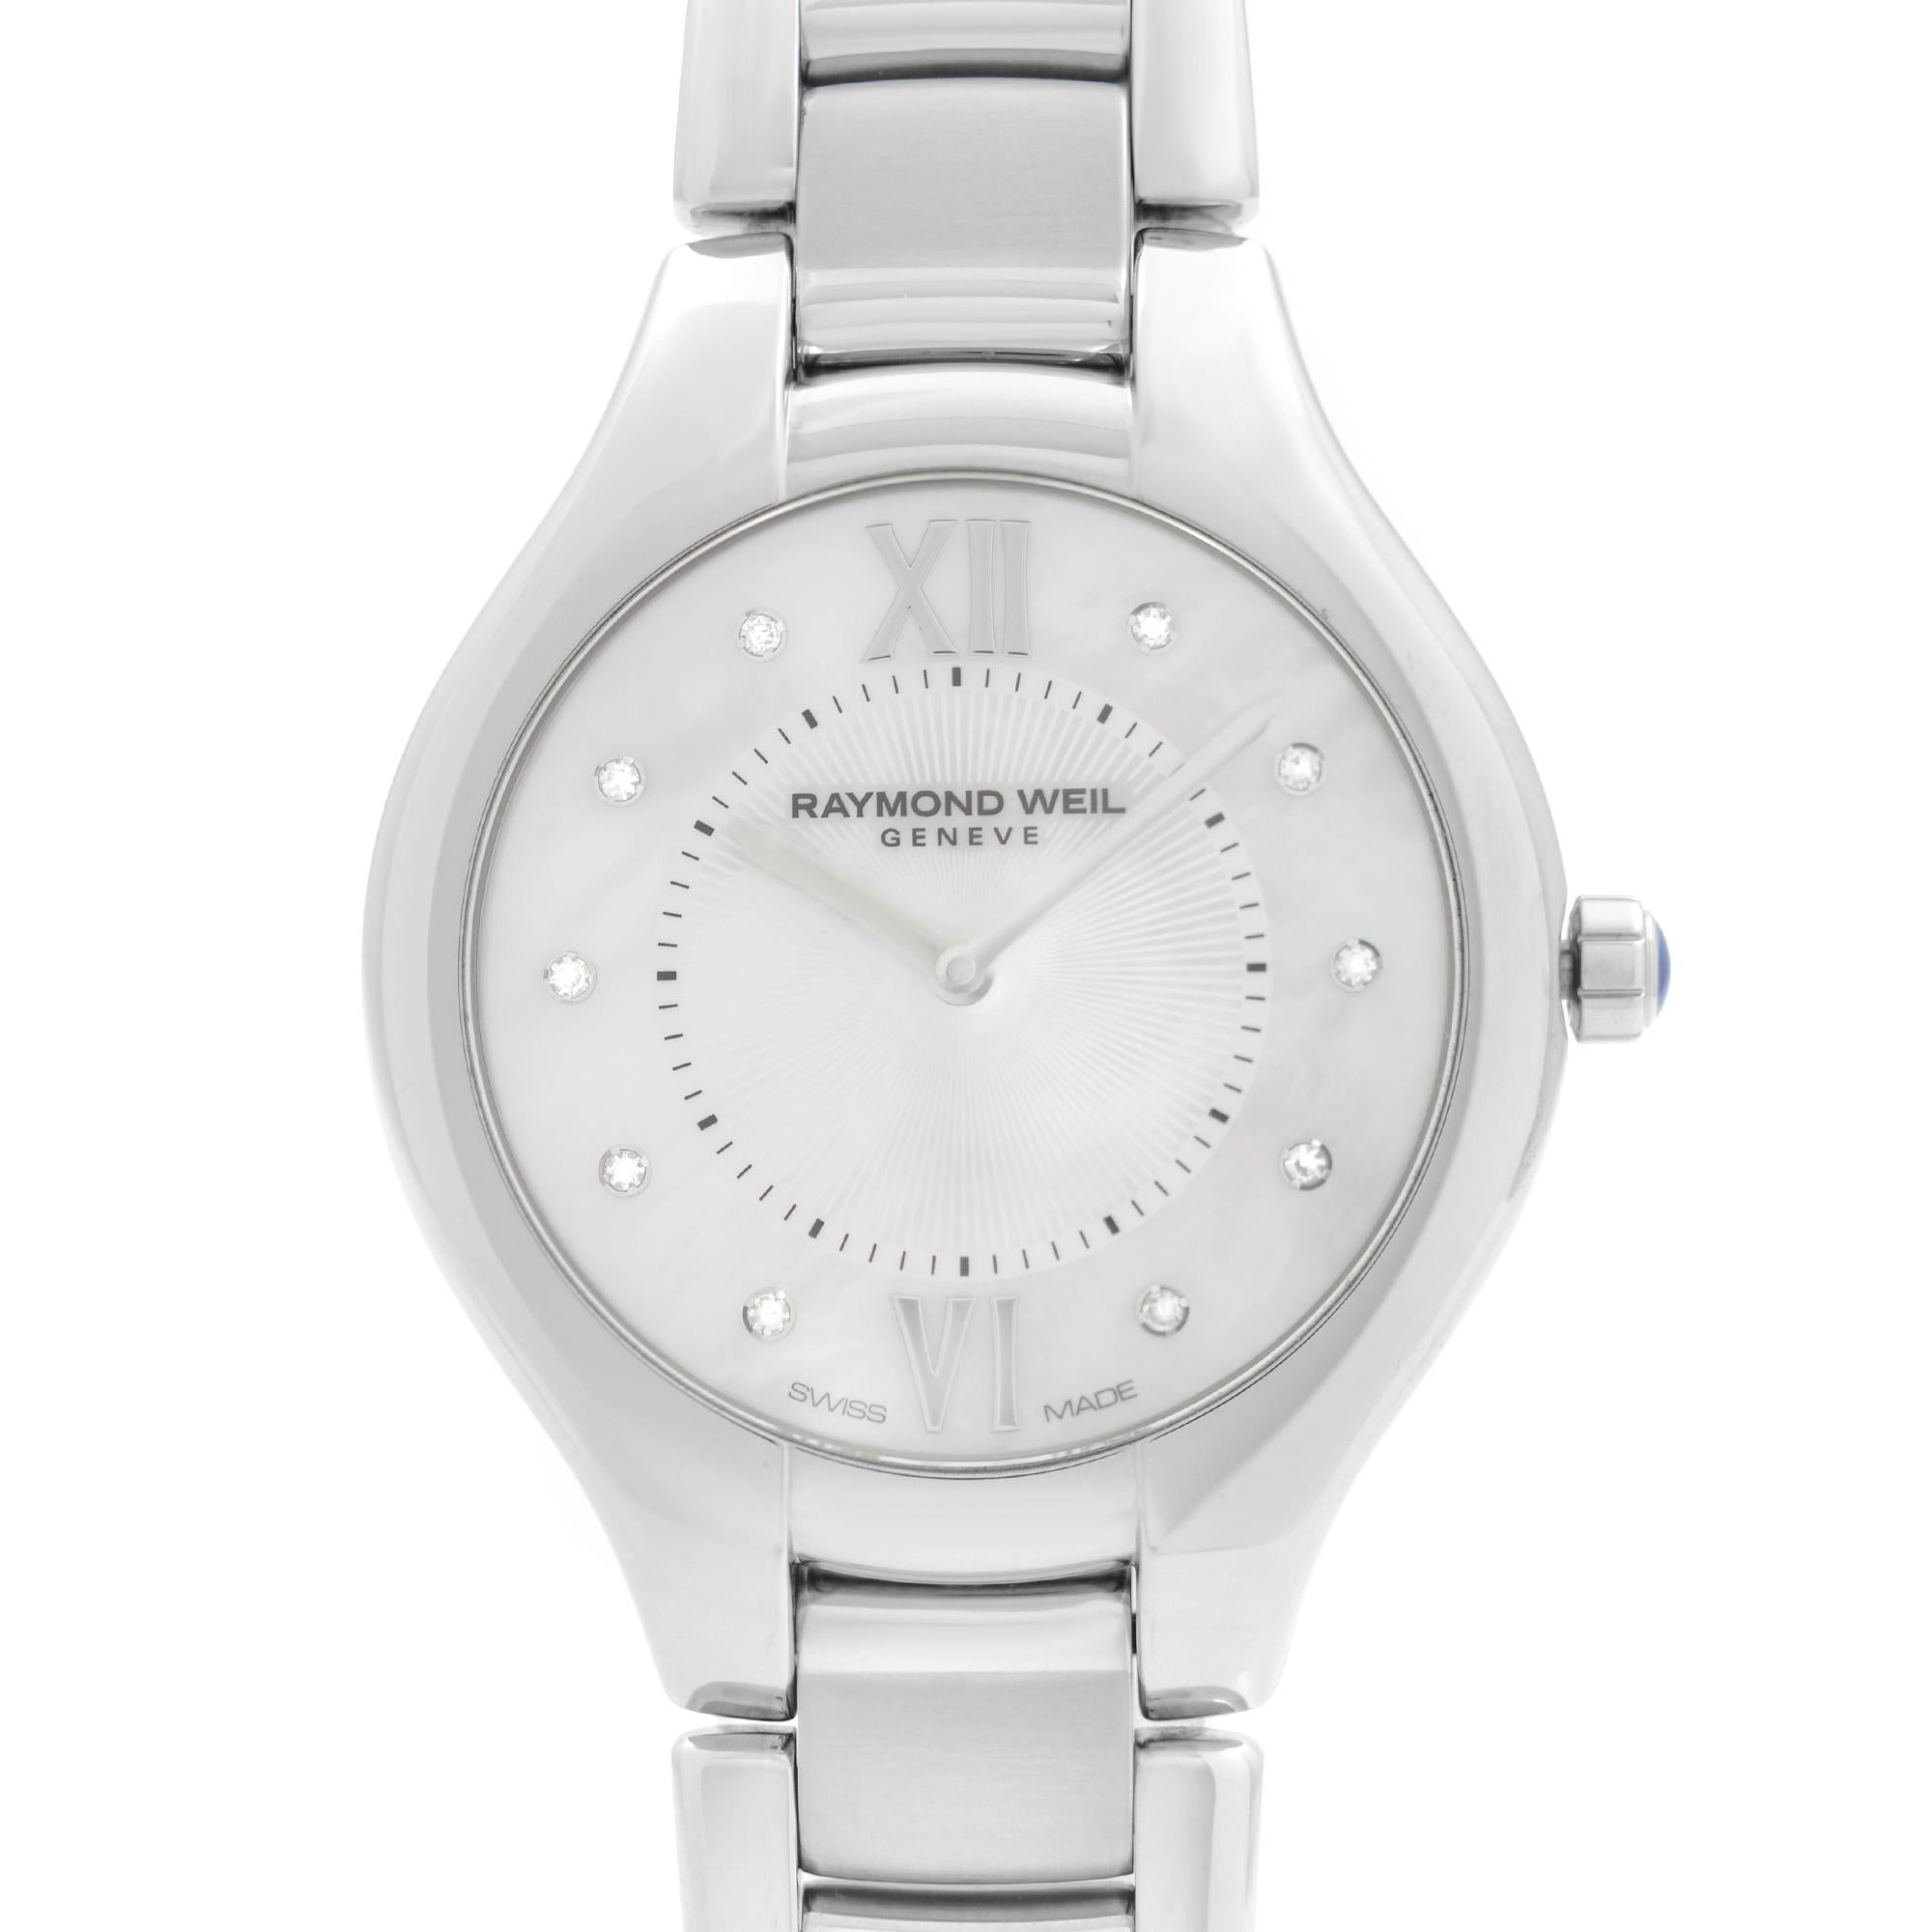 Unworn Raymond Weil Noemia Steel White MOP Dial Quartz Ladies Watch. This Beautiful Timepiece Features: Stainless Steel Case and Bracelet, Fixed Stainless Steel Bezel, White MOP Dial with Silver-Tone Hands, And Roman Numerals and Diamond Hour